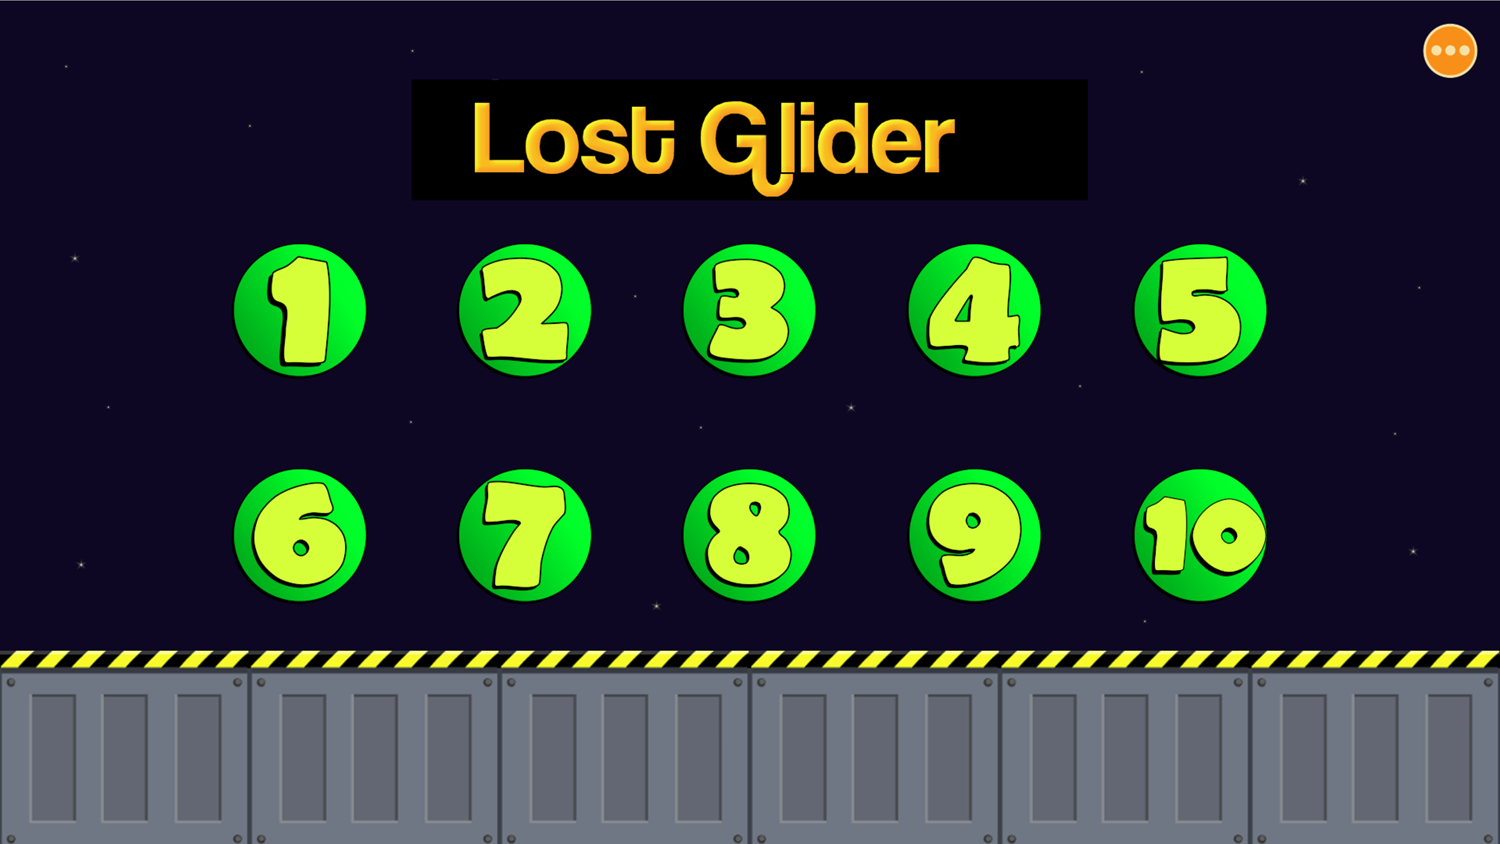 Lost Glider Game Space Levels Level Select Screenshot.